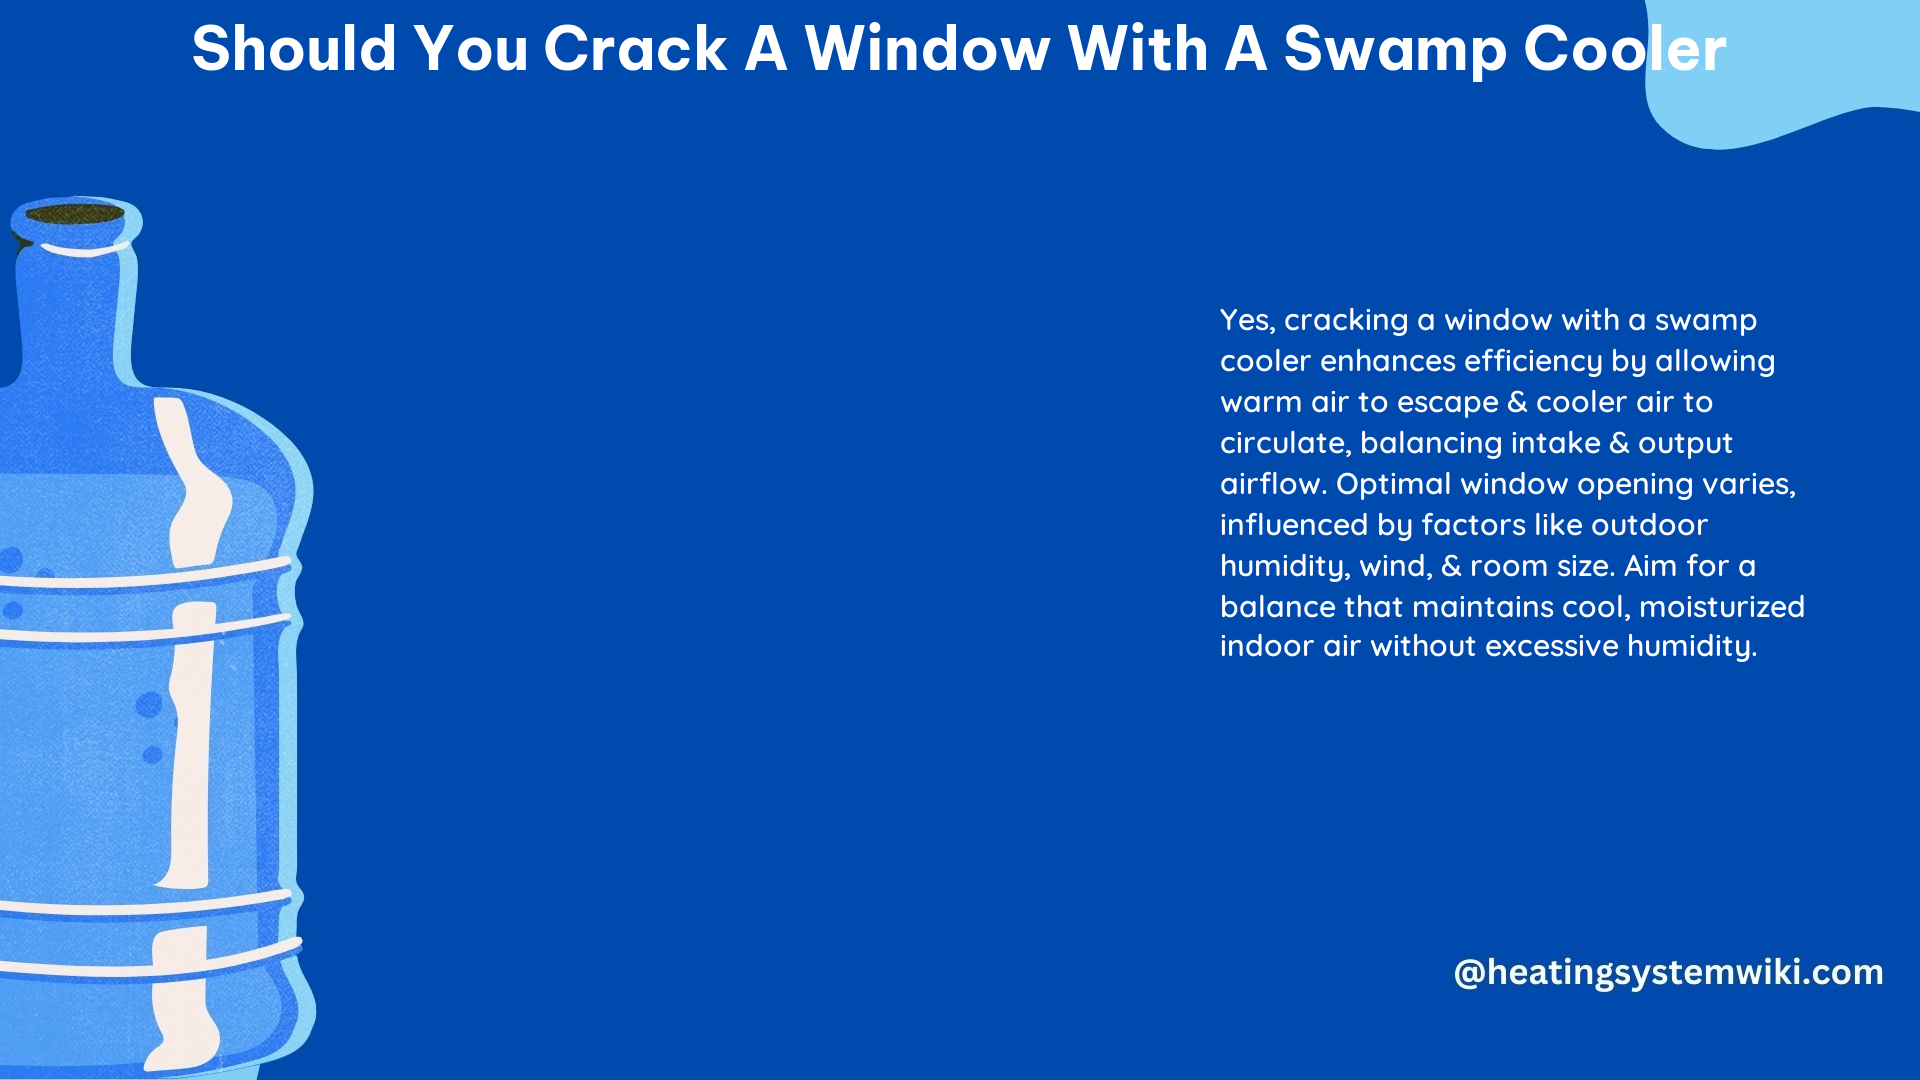 Should You Crack a Window With a Swamp Cooler